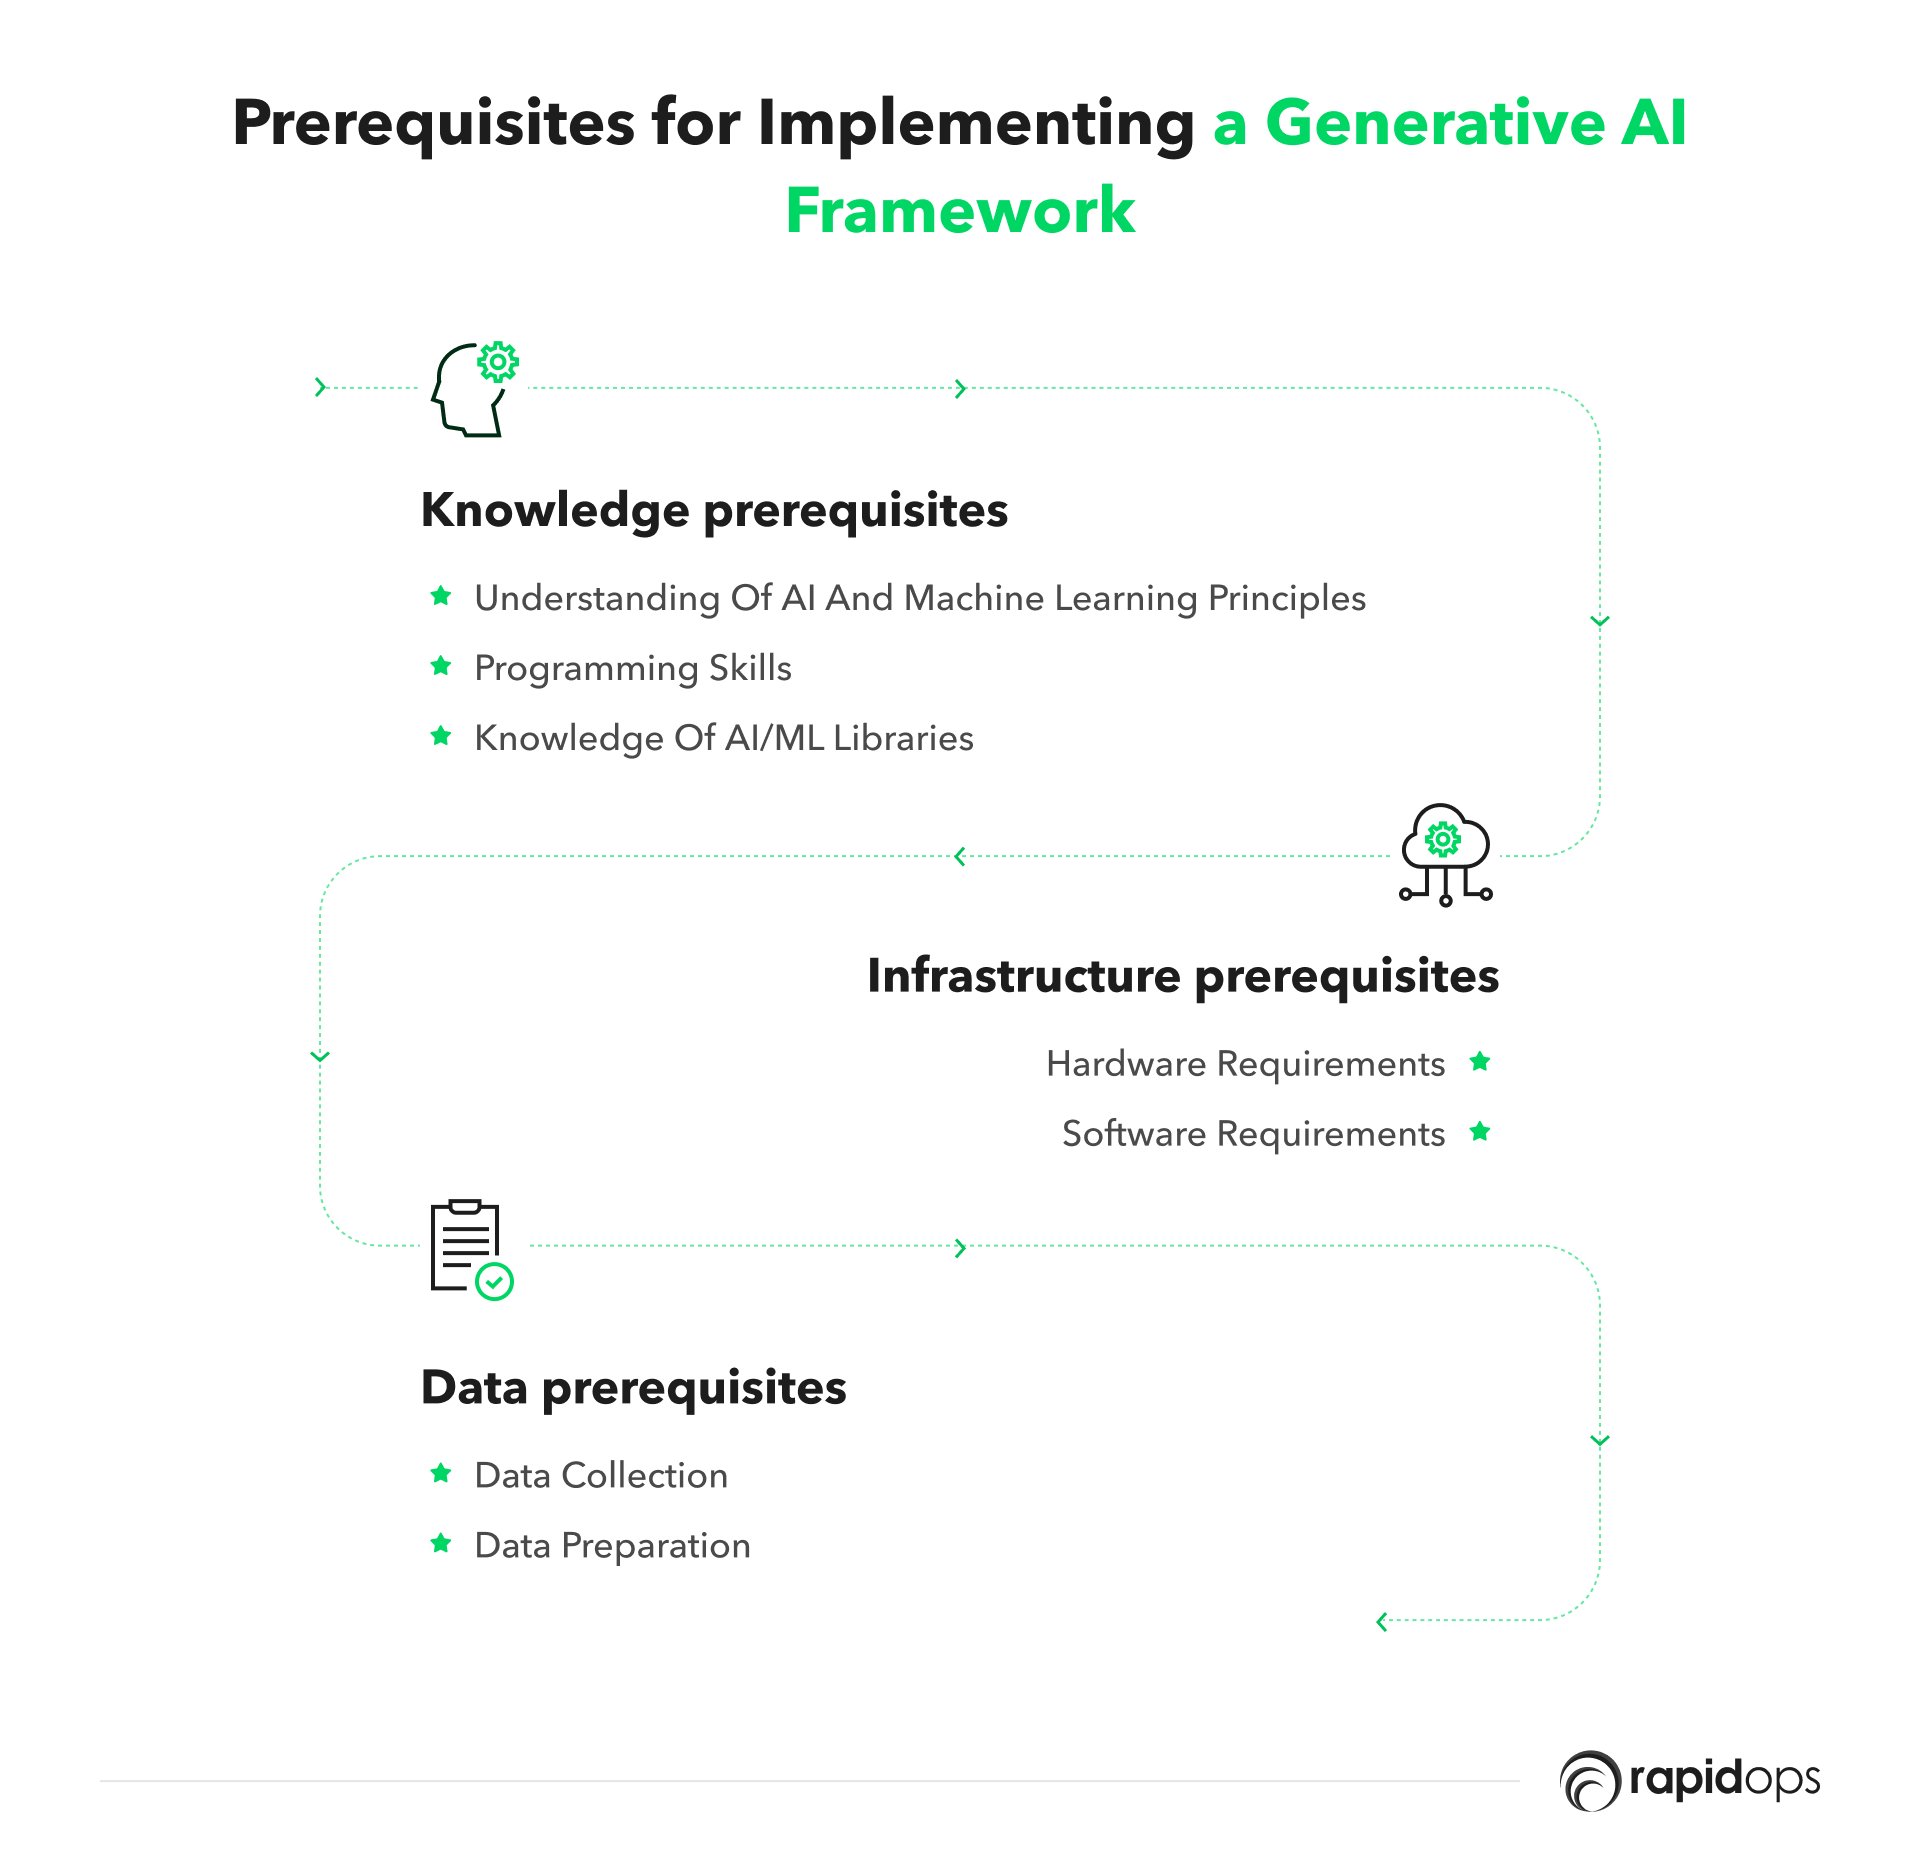 Prerequisites for implementing a generative AI framework